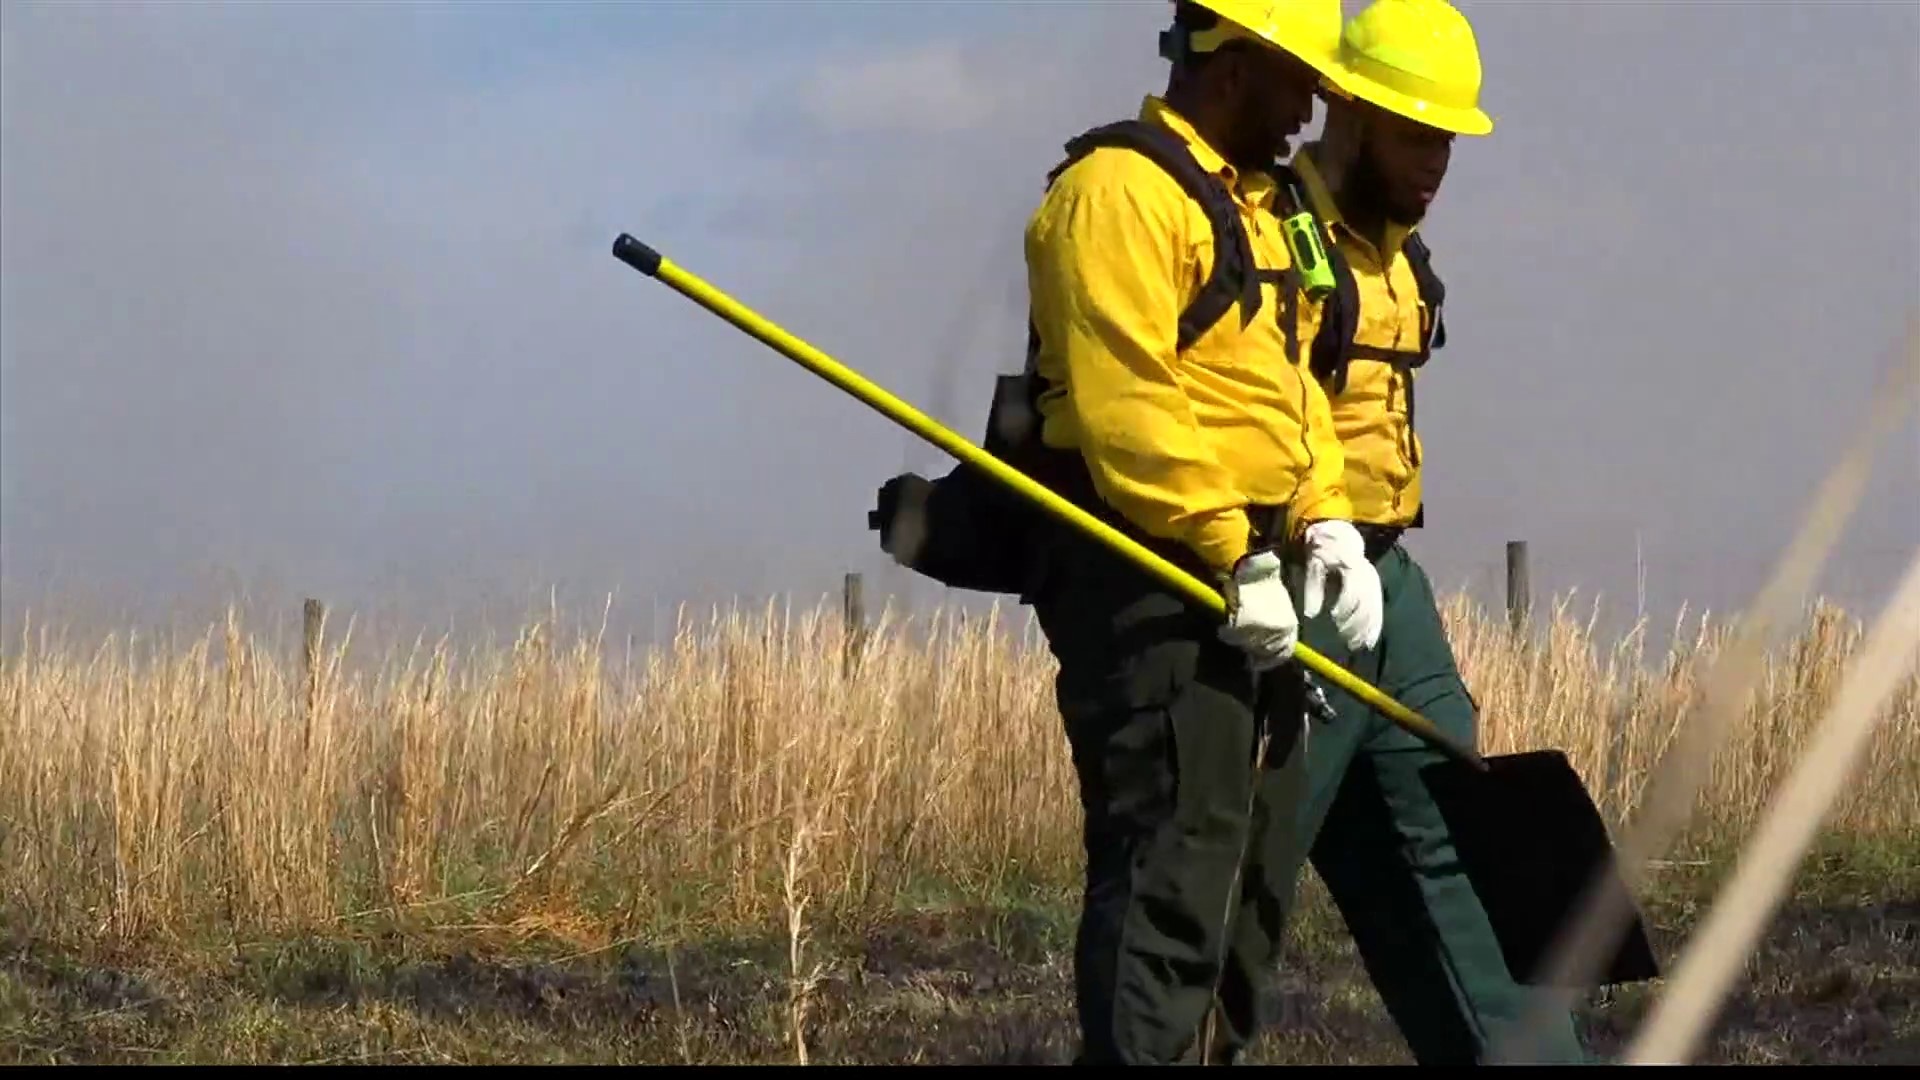 The Firedawgs of AAMU work in partnership with the USDA, training with prescribed burns to prepare them for wildfires.